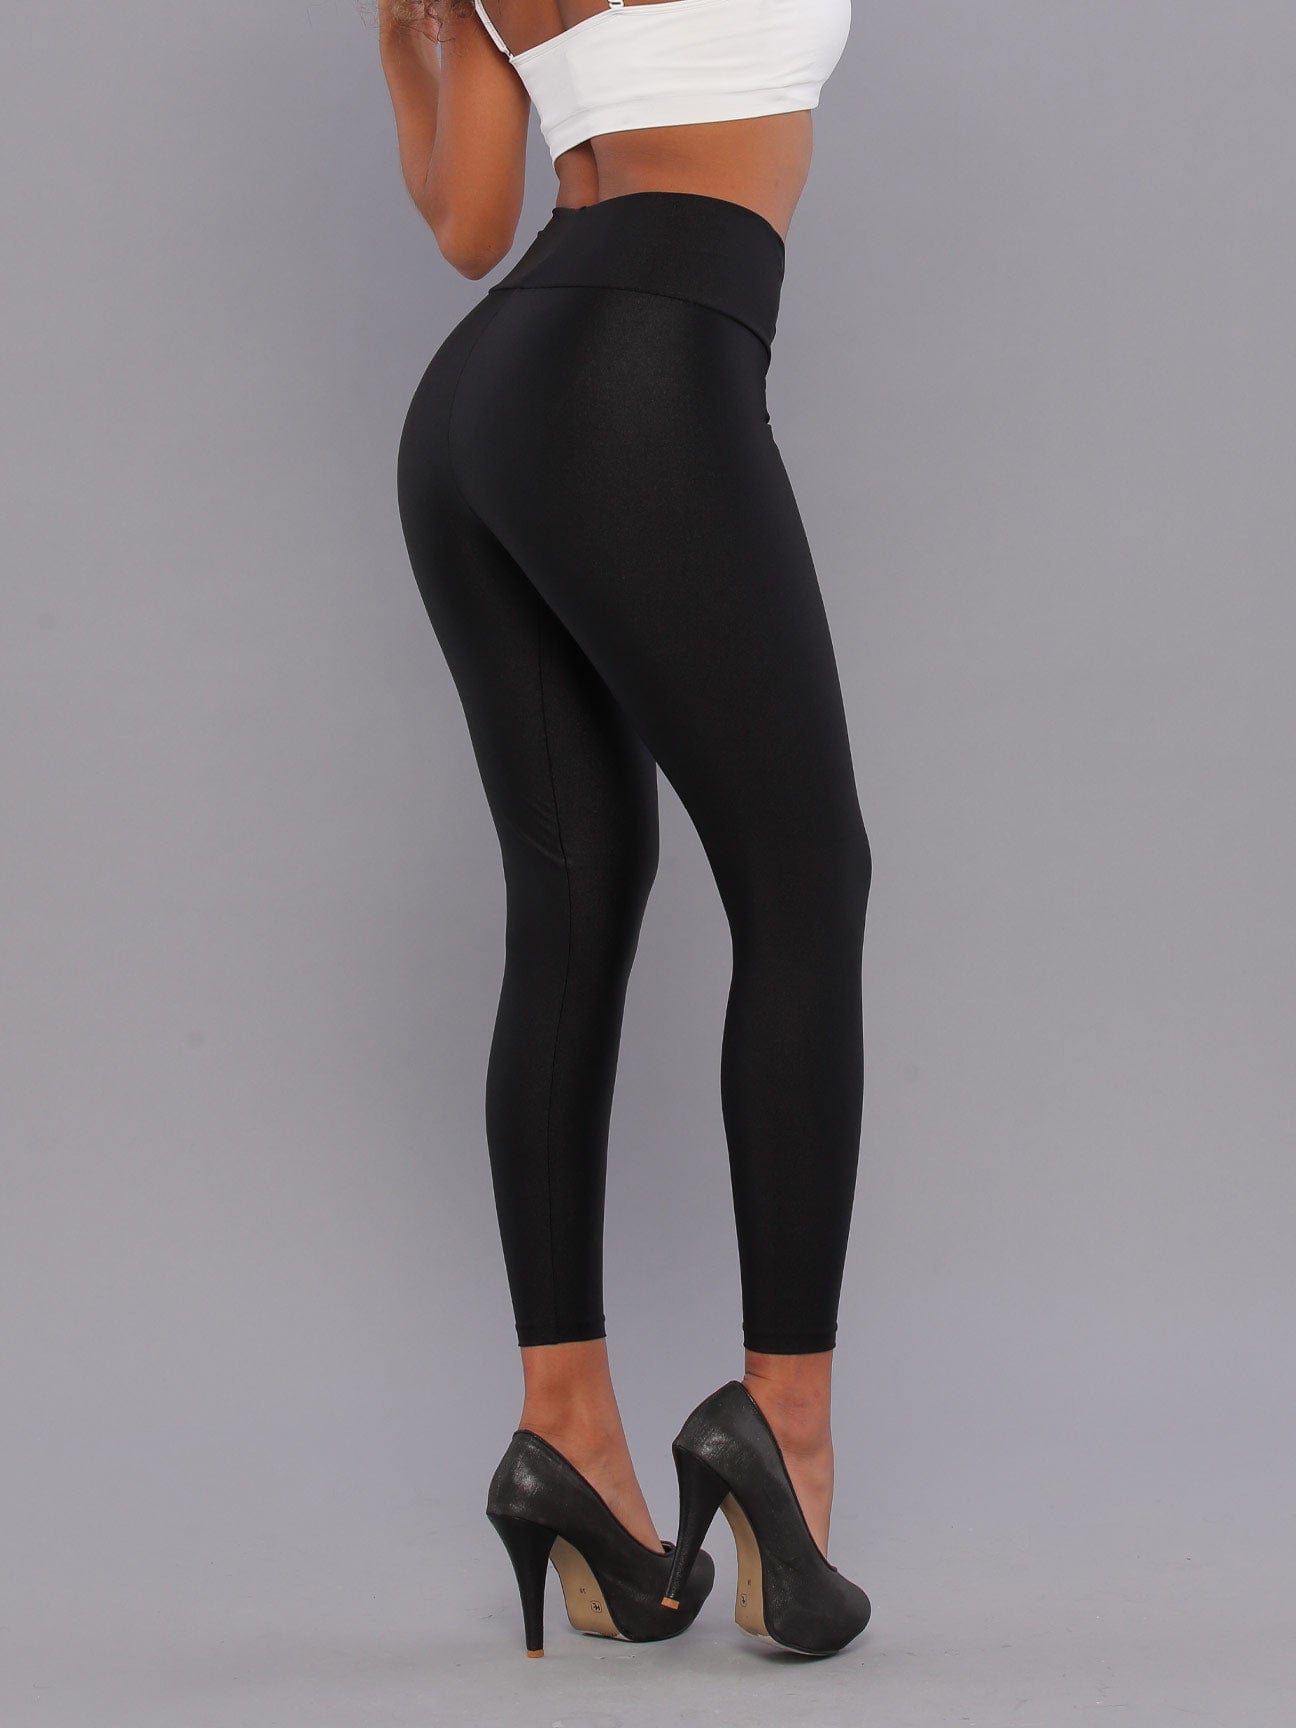 Femme Fatale Butt Lift Leggings with Tummy Control 1306